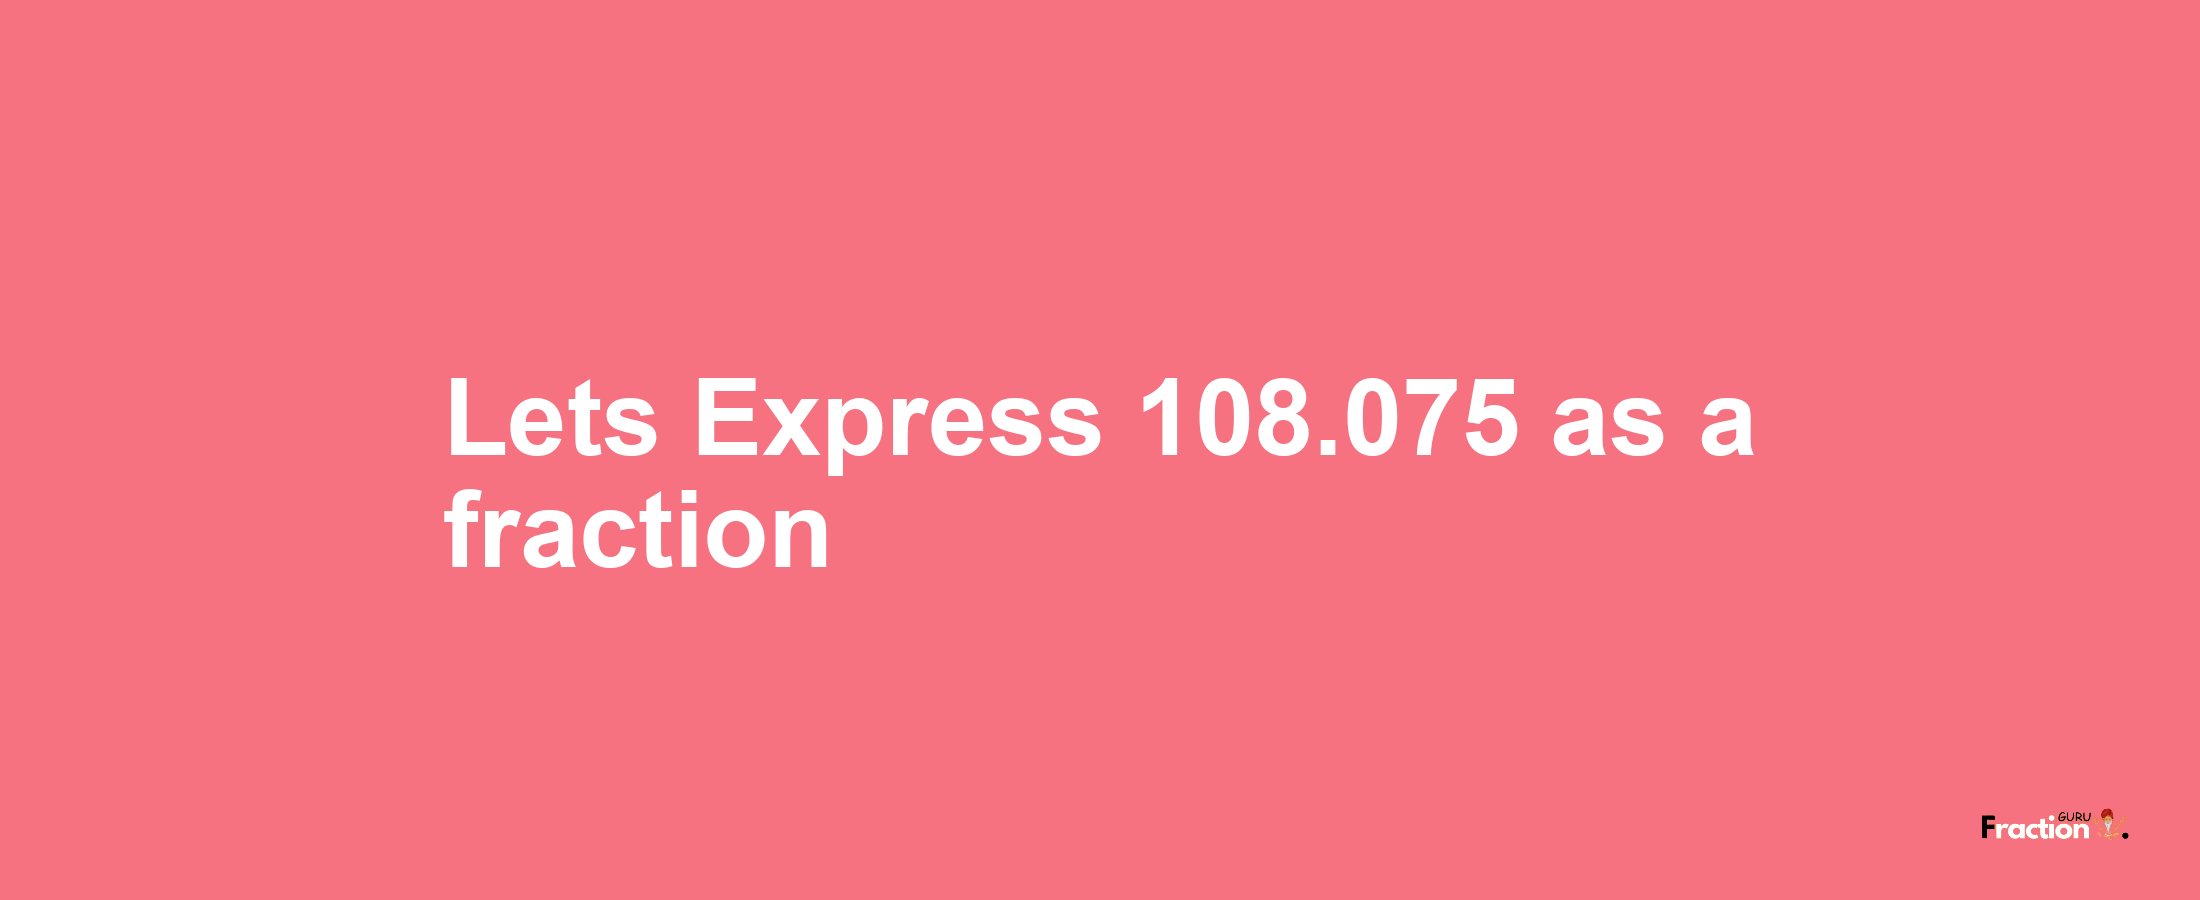 Lets Express 108.075 as afraction